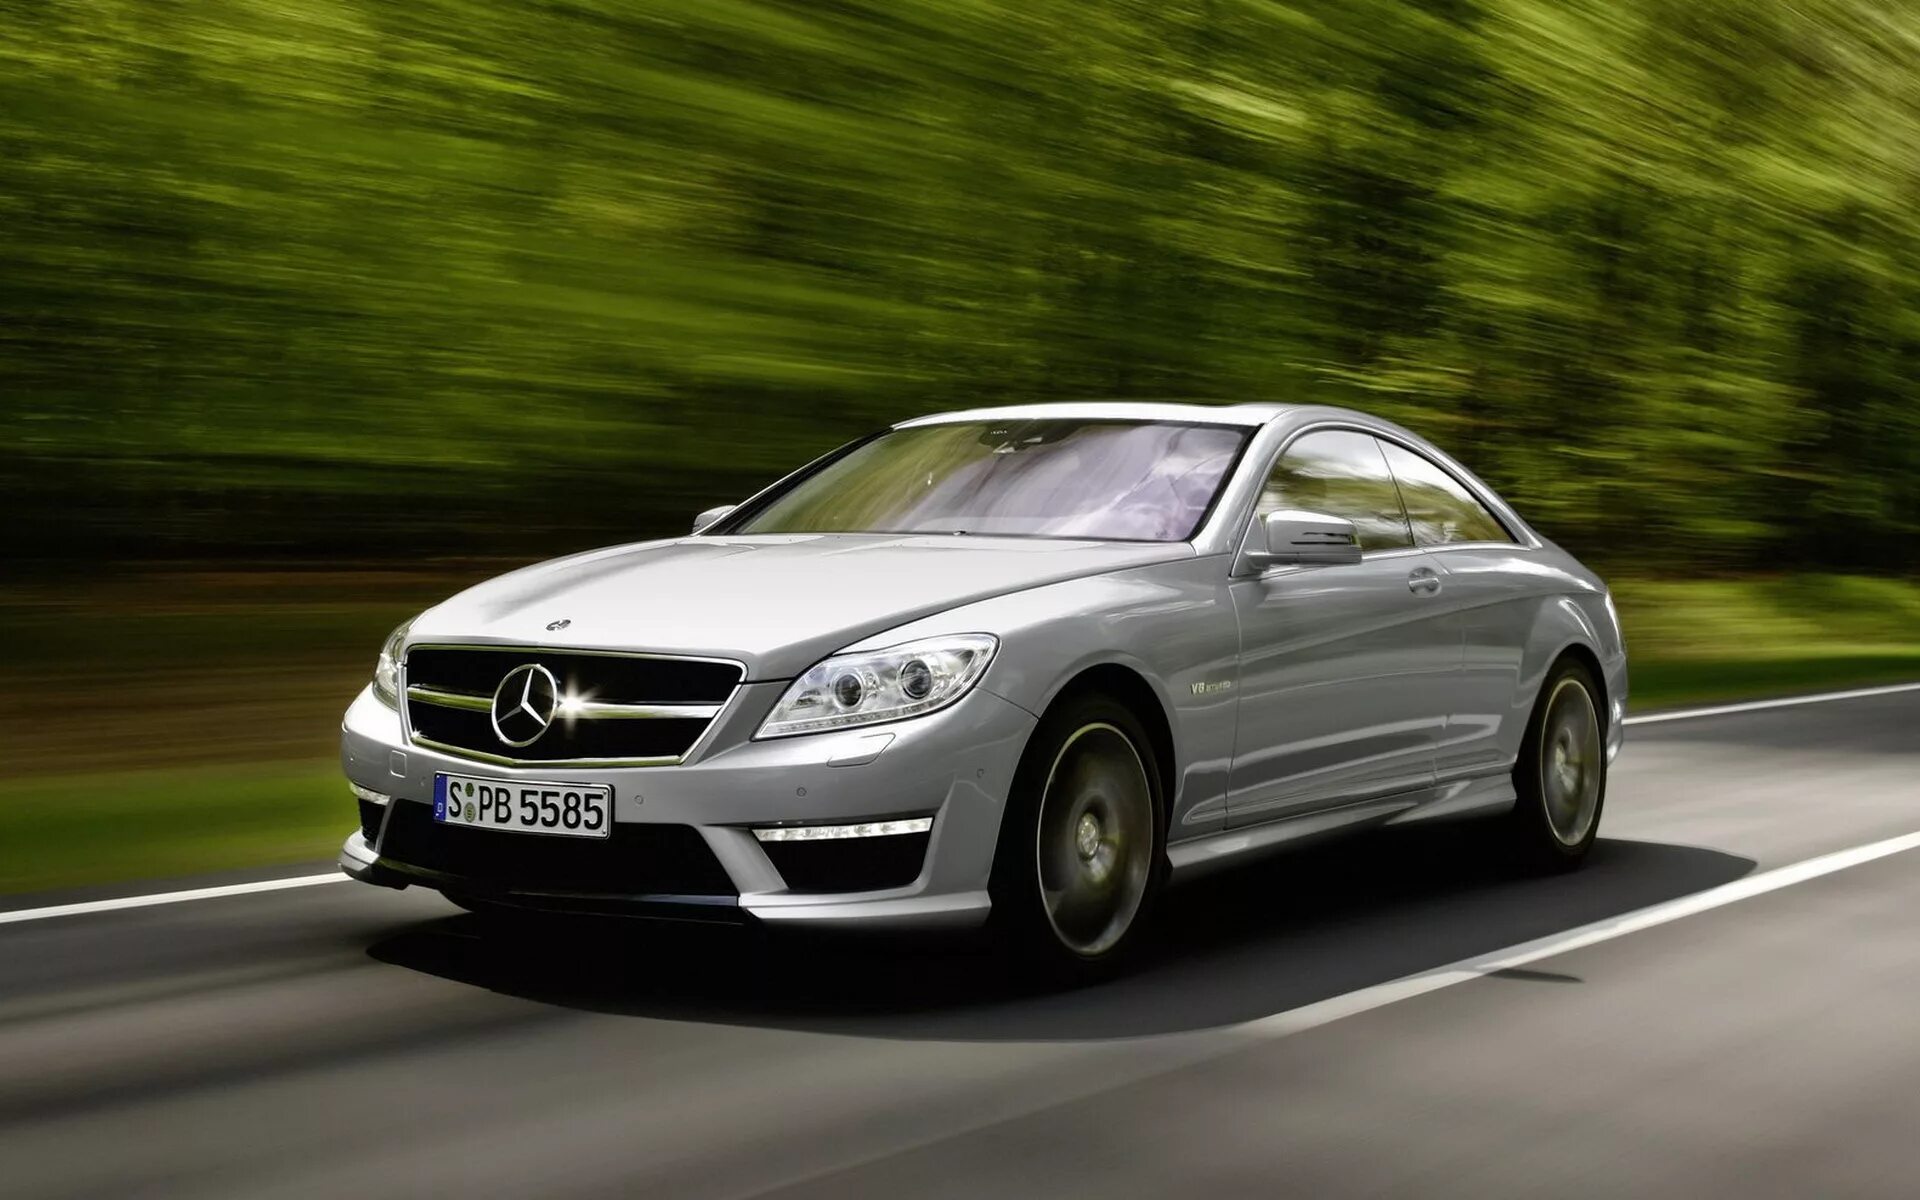 Mercedes Benz CL 63 AMG. Мерседес CL 63 АМГ. Mercedes CL 63 AMG 2012. Mercedes Benz CLS 63 AMG.